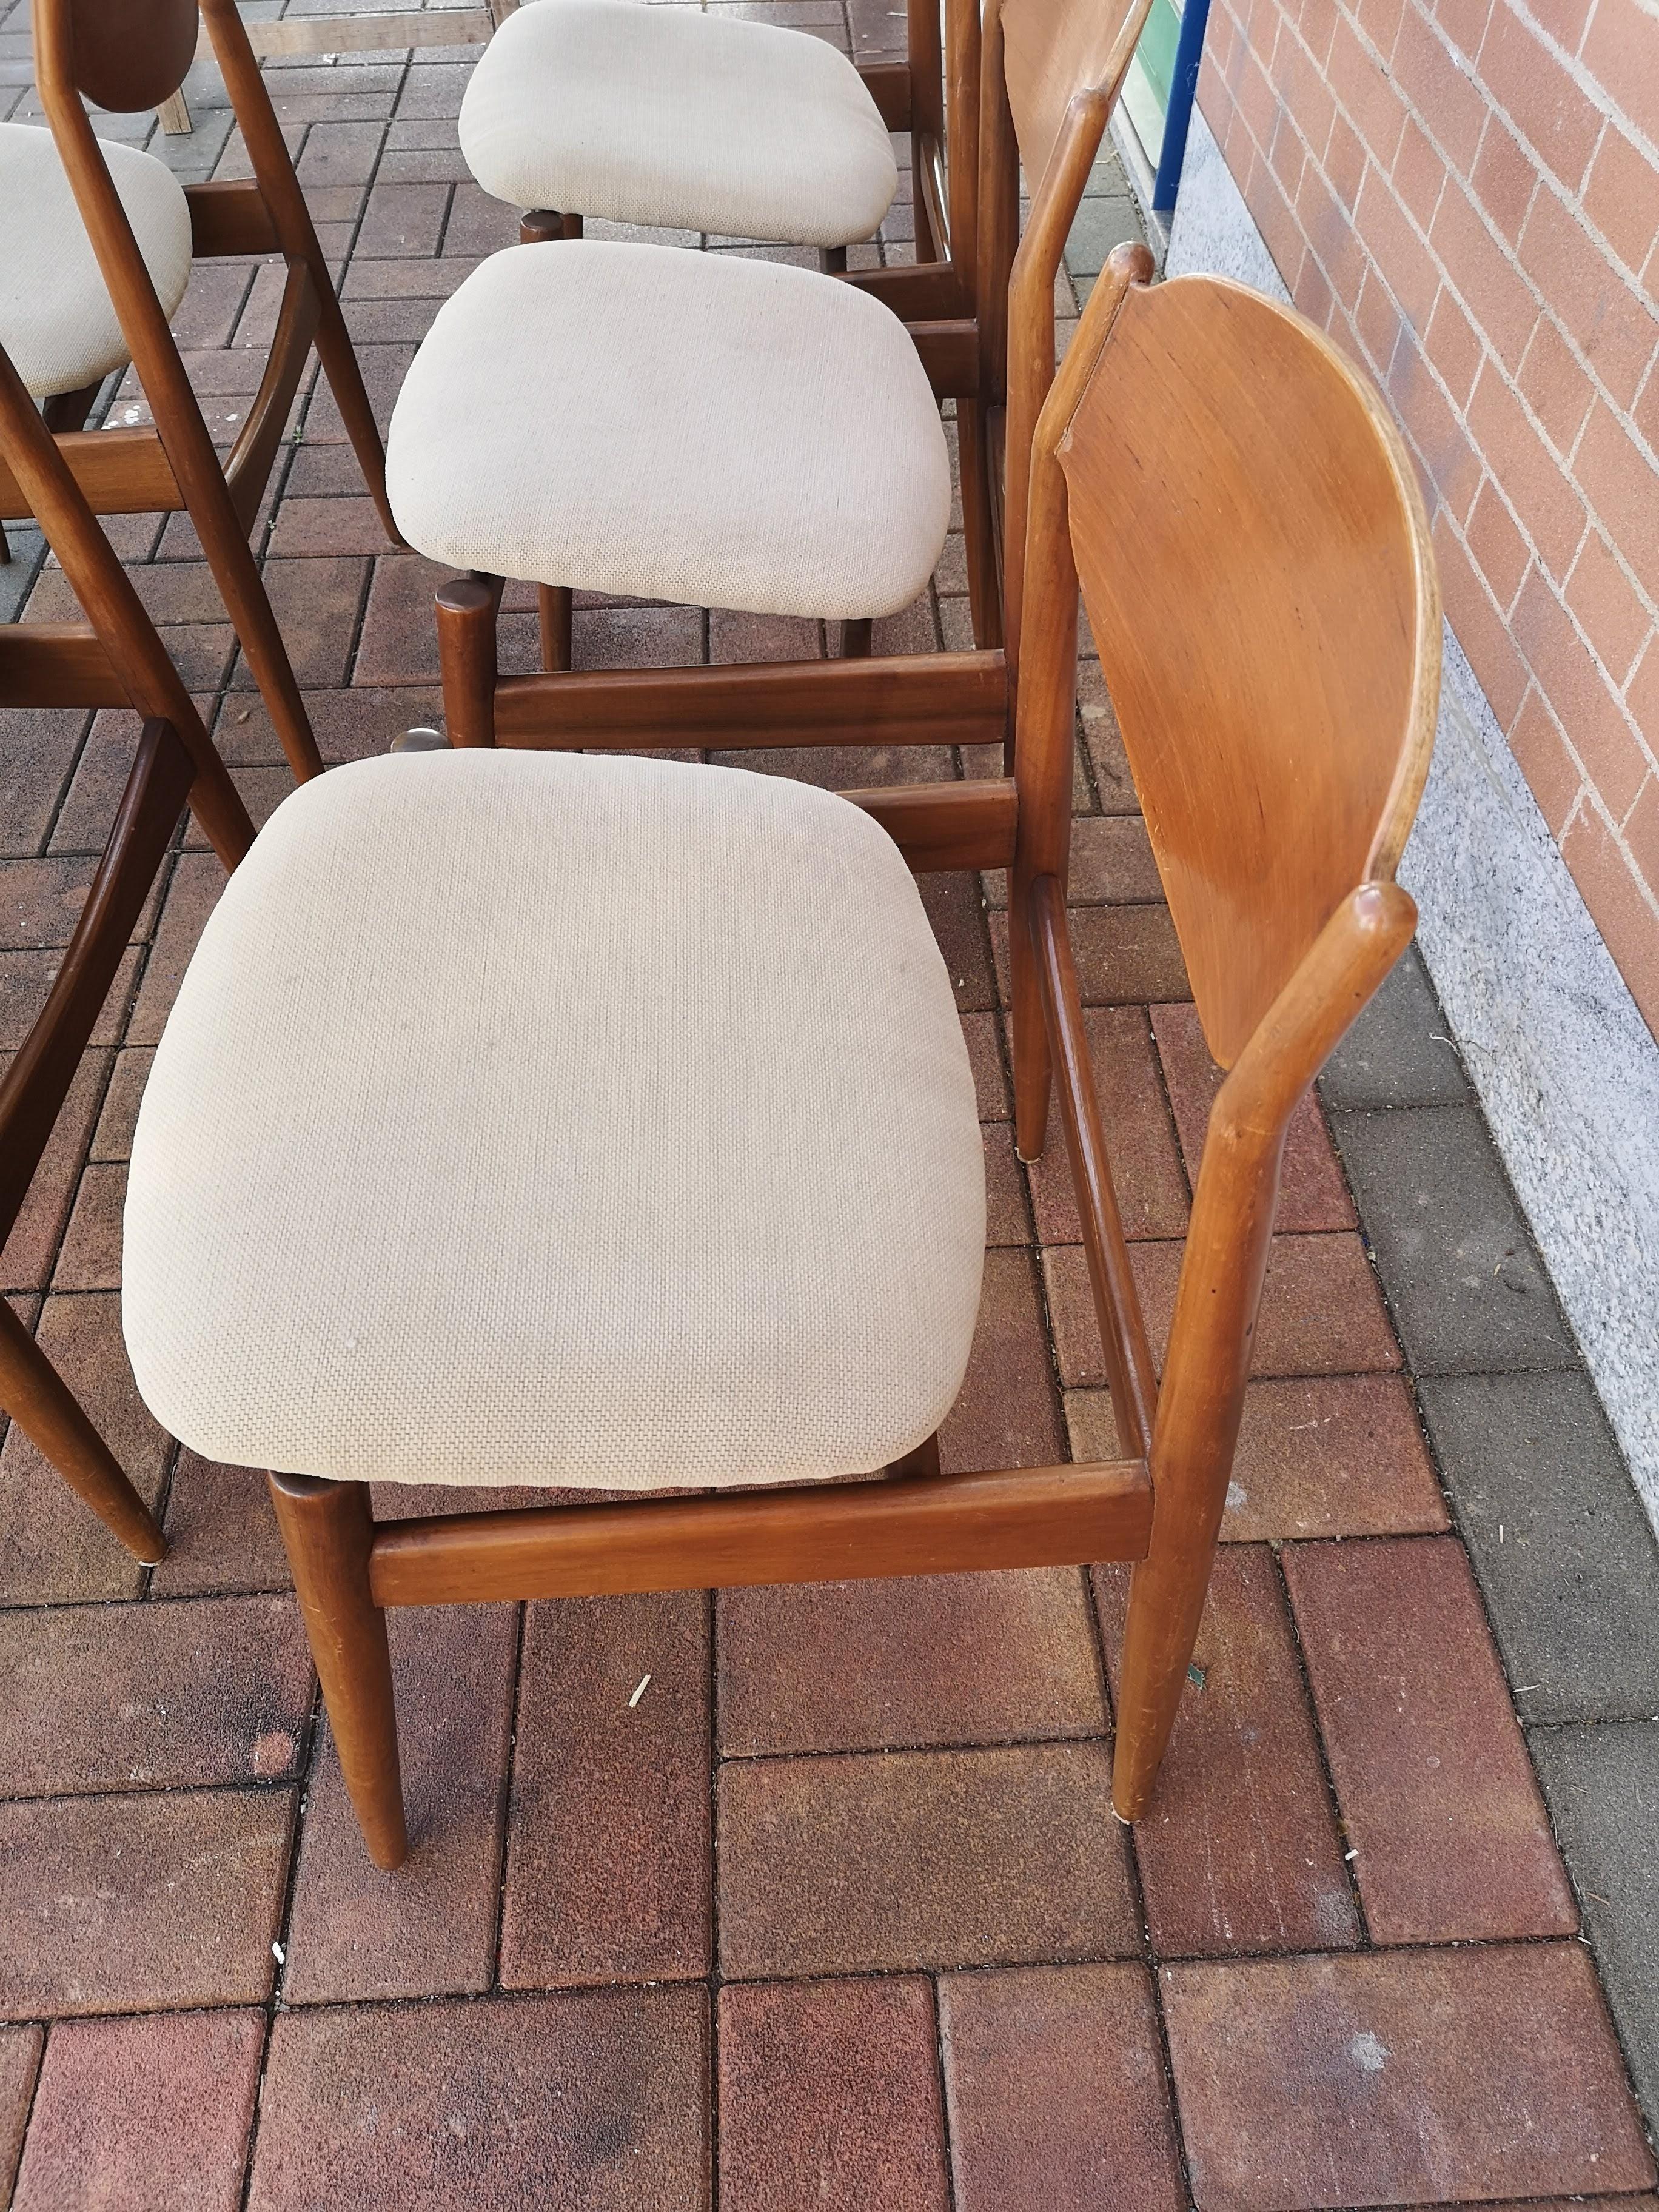 Set of 6 chairs designed by Leonardo Fiori in the 1960s and produced by ISA of Bergamo (Italy).

The 6 chairs are all in very good vintage condition.
Structure in teak and seat in all original fabric.

The production mark is shown under the